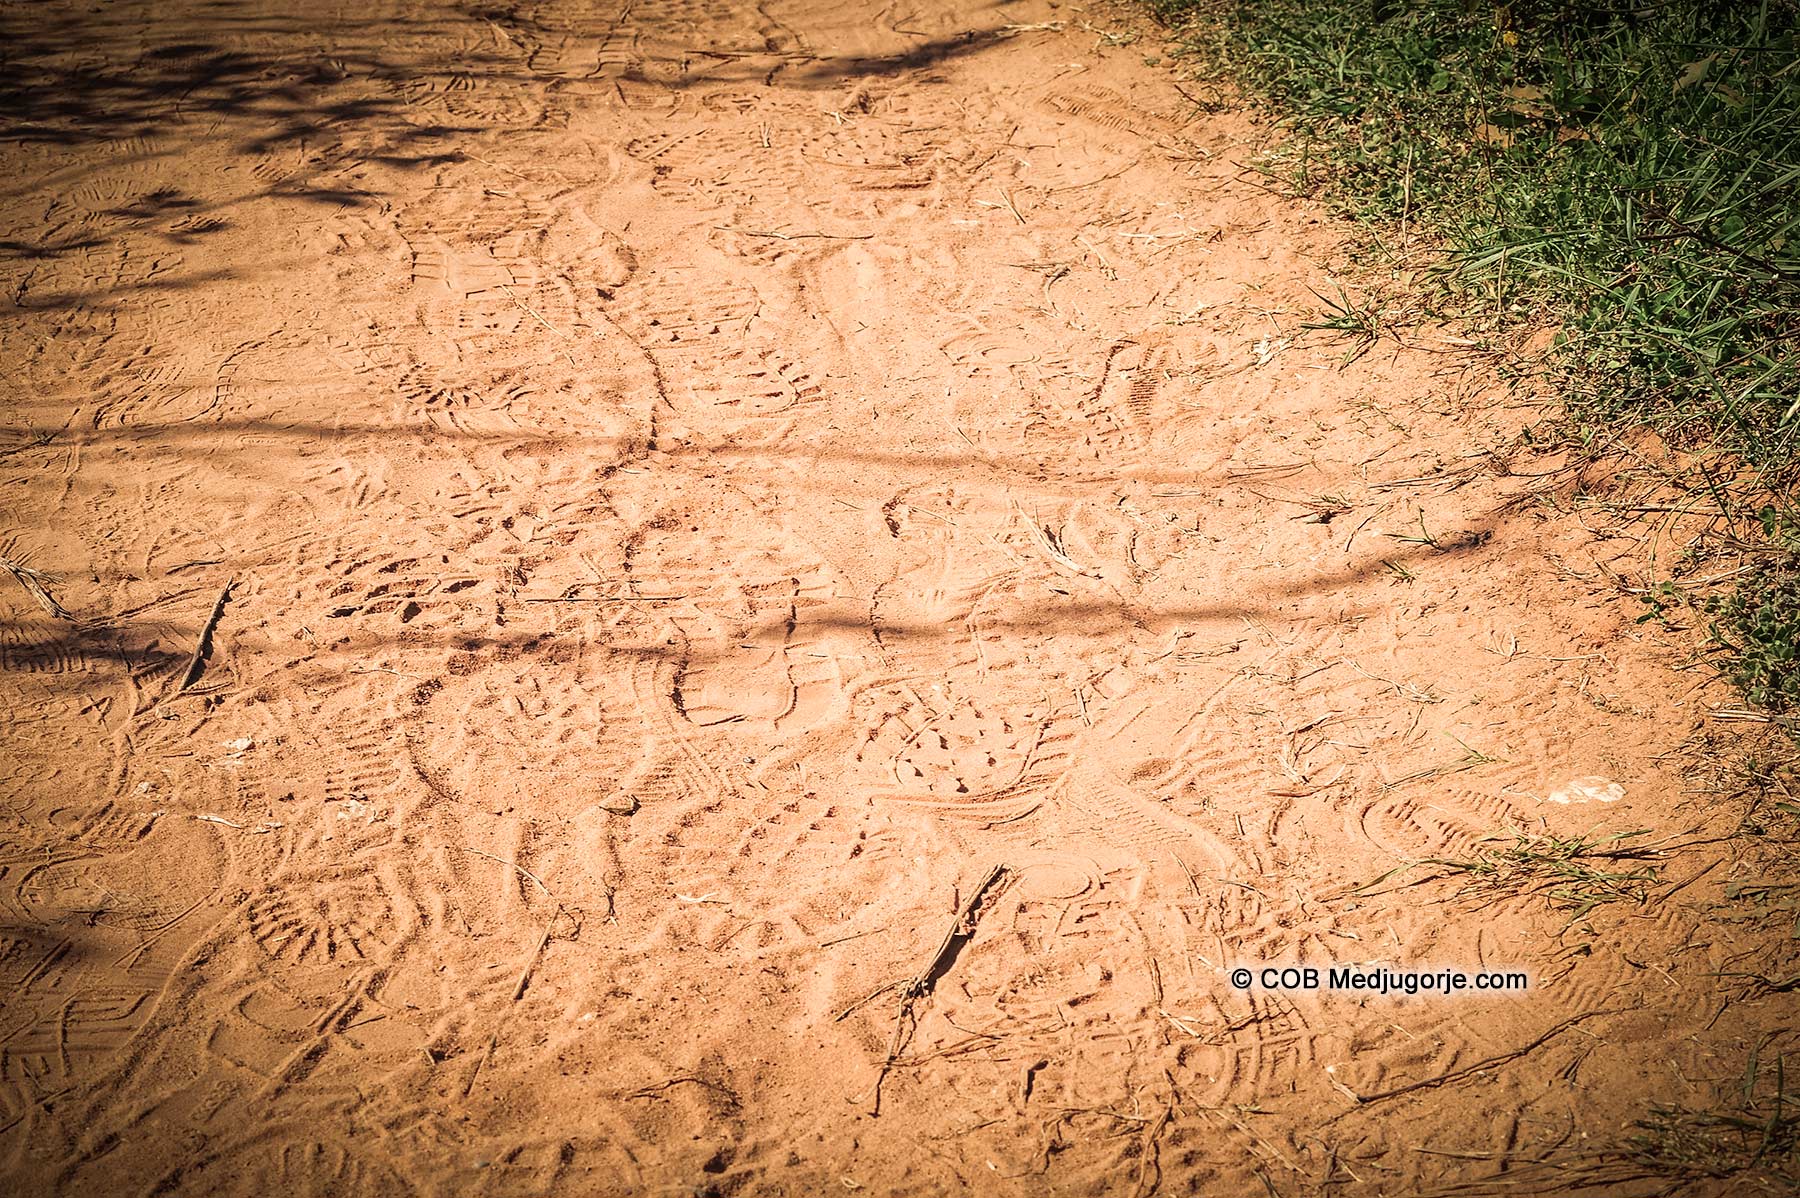 Footprints on the path in Medjugorje